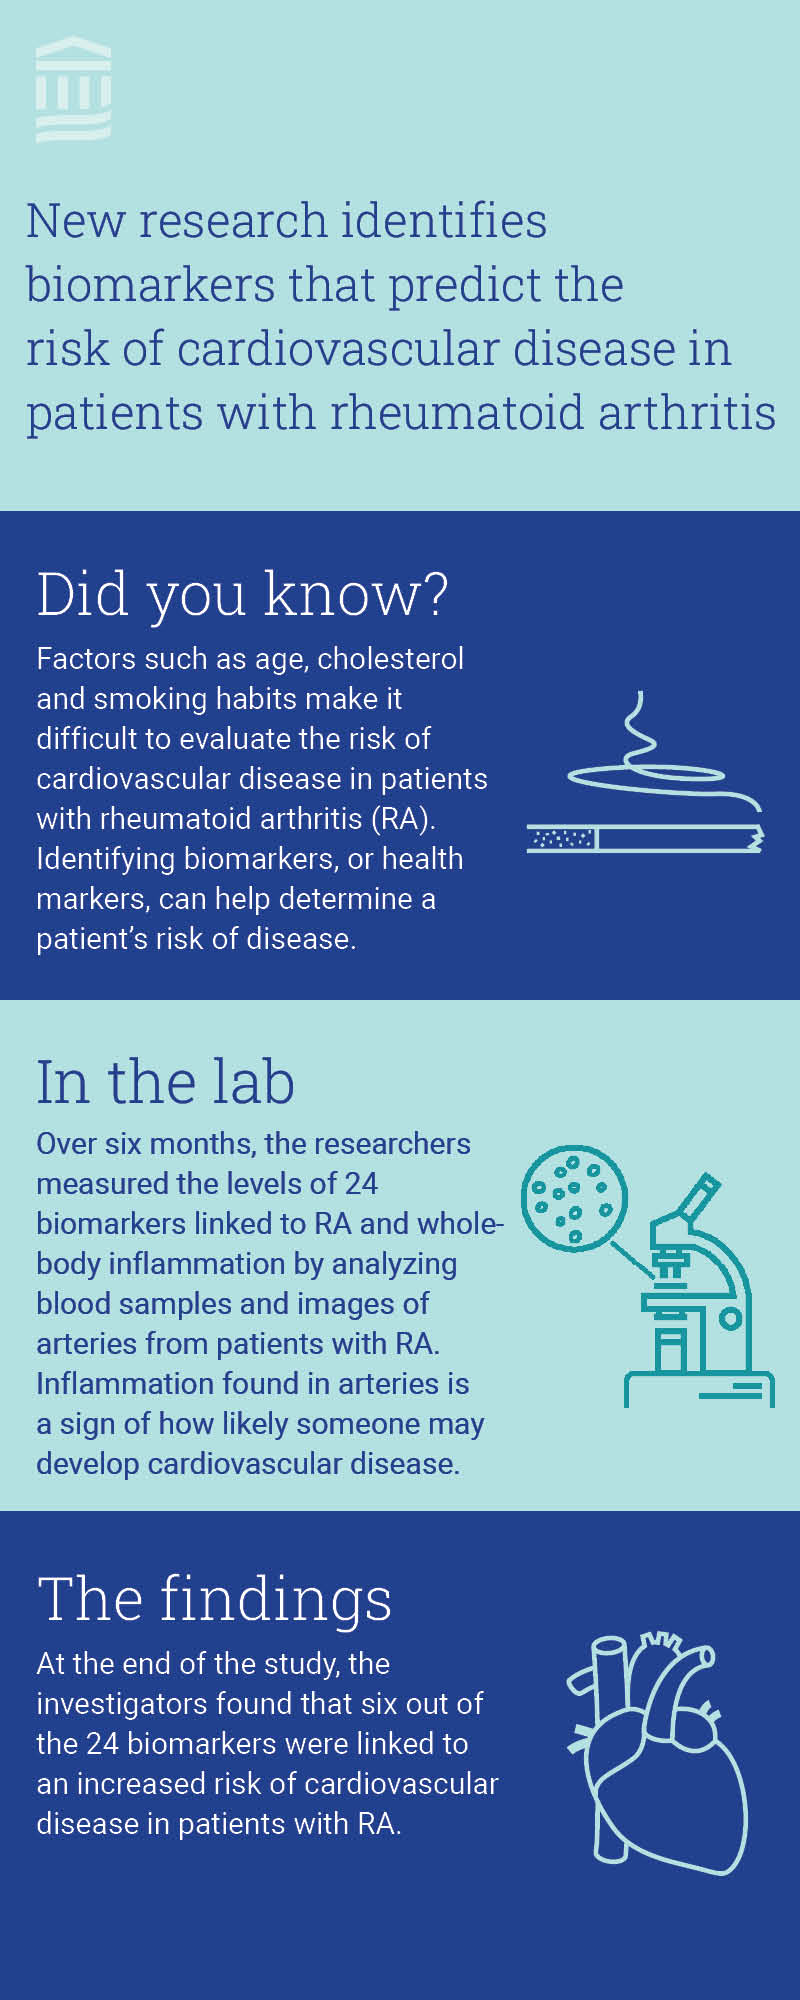 An infographic titled "New research identifies biomarkers that predict the risk of cardiovascular disease in patients with rheumatoid arthritis". In the first panel, there is a cigarette icon on the right with smoke coming on out of it. The text on the second panel reads, "Did you know? Factors such as age, cholesterol and smoking habits make it difficult to evaluate the risk of cardiovascular disease in patients with rheumatoid arthritis (RA). Identifying biomarkers, or health markers can help determine a patient's risk of disease." In the second panel, there is a line illustration of a microscope on the right. The text in the second panel is titled "In the lab" and reads "Over six months, the researchers measured the levels of 24 biomarkers linked to RA and whole-body inflammation by analyzing blood samples and images of arteries from patients with RA. Inflammation found in arteries is a sign of how likely someone may develop cardiovascular disease. In the third panel, there is a line illustration of the anatomical heart. The third panel is titled "The findings", and reads "At the end of the study, the investigators found that six out of the 24 biomarkers were linked to an increased risk of cardiovascular disease in patients with RA."